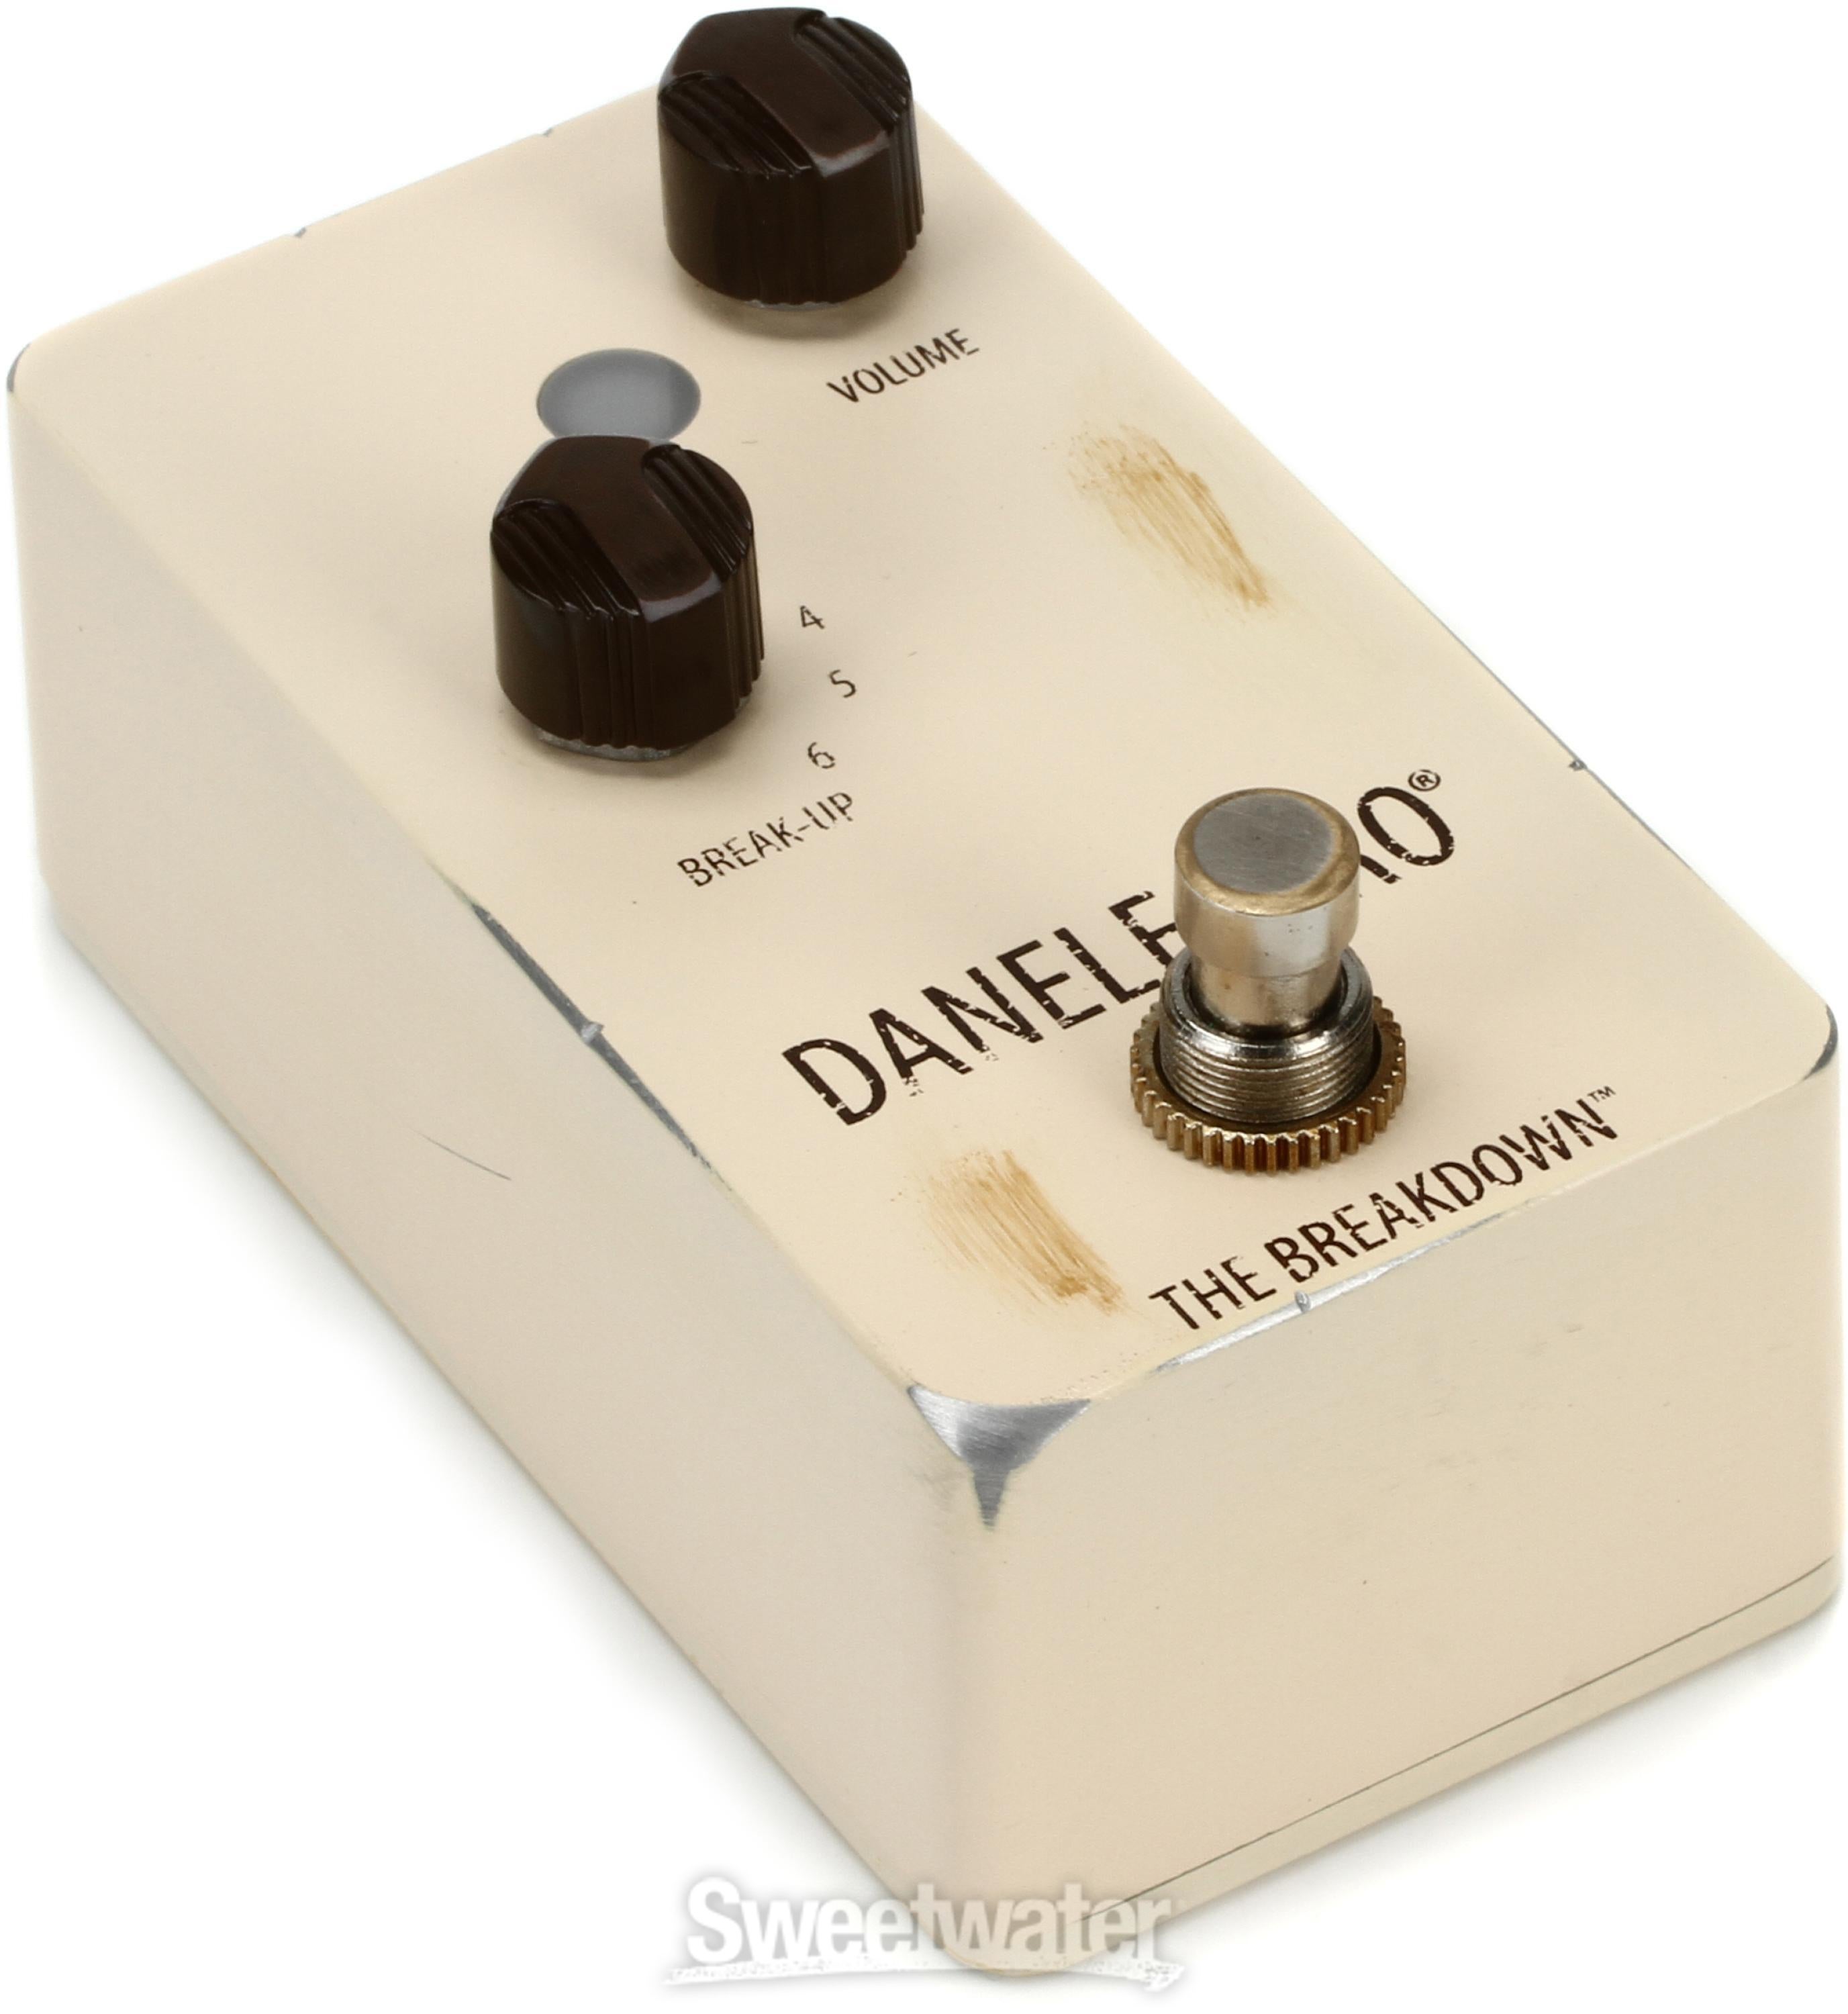 Danelectro The Breakdown Overdrive Pedal | Sweetwater